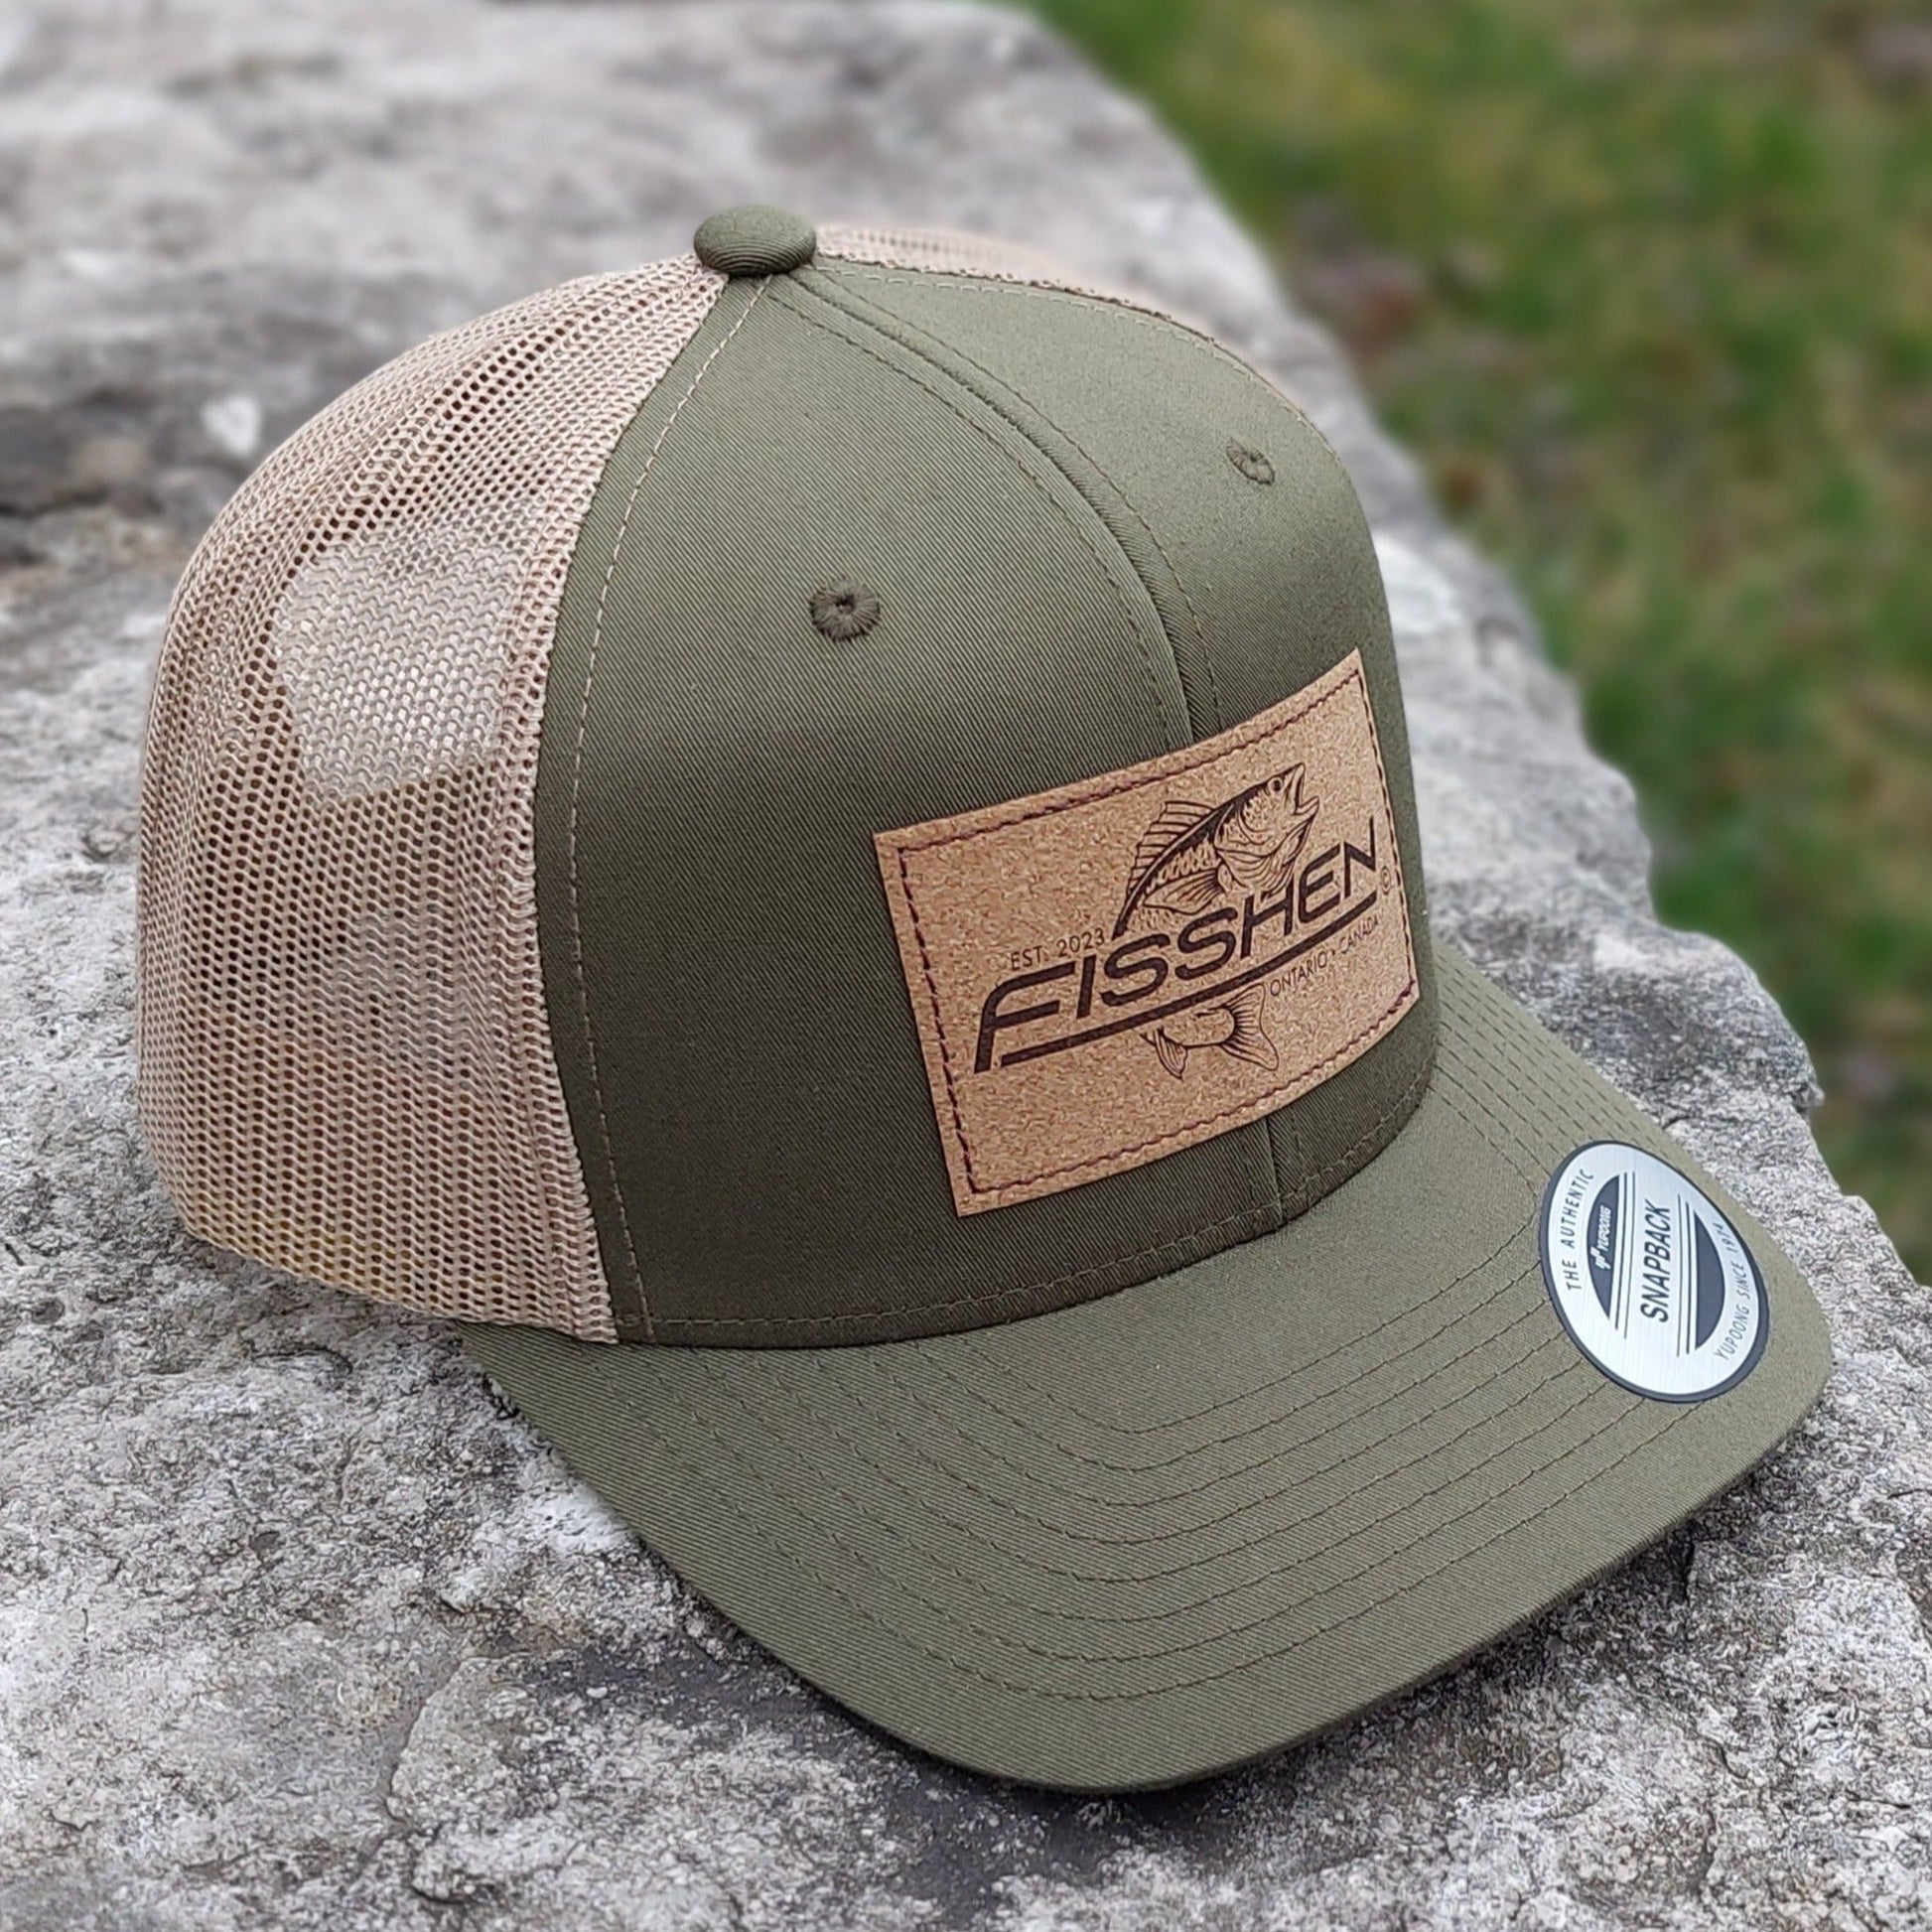 Fishing design with the word Fisshen. Trout image on a cork patch. Hat is Moss green with taupe back